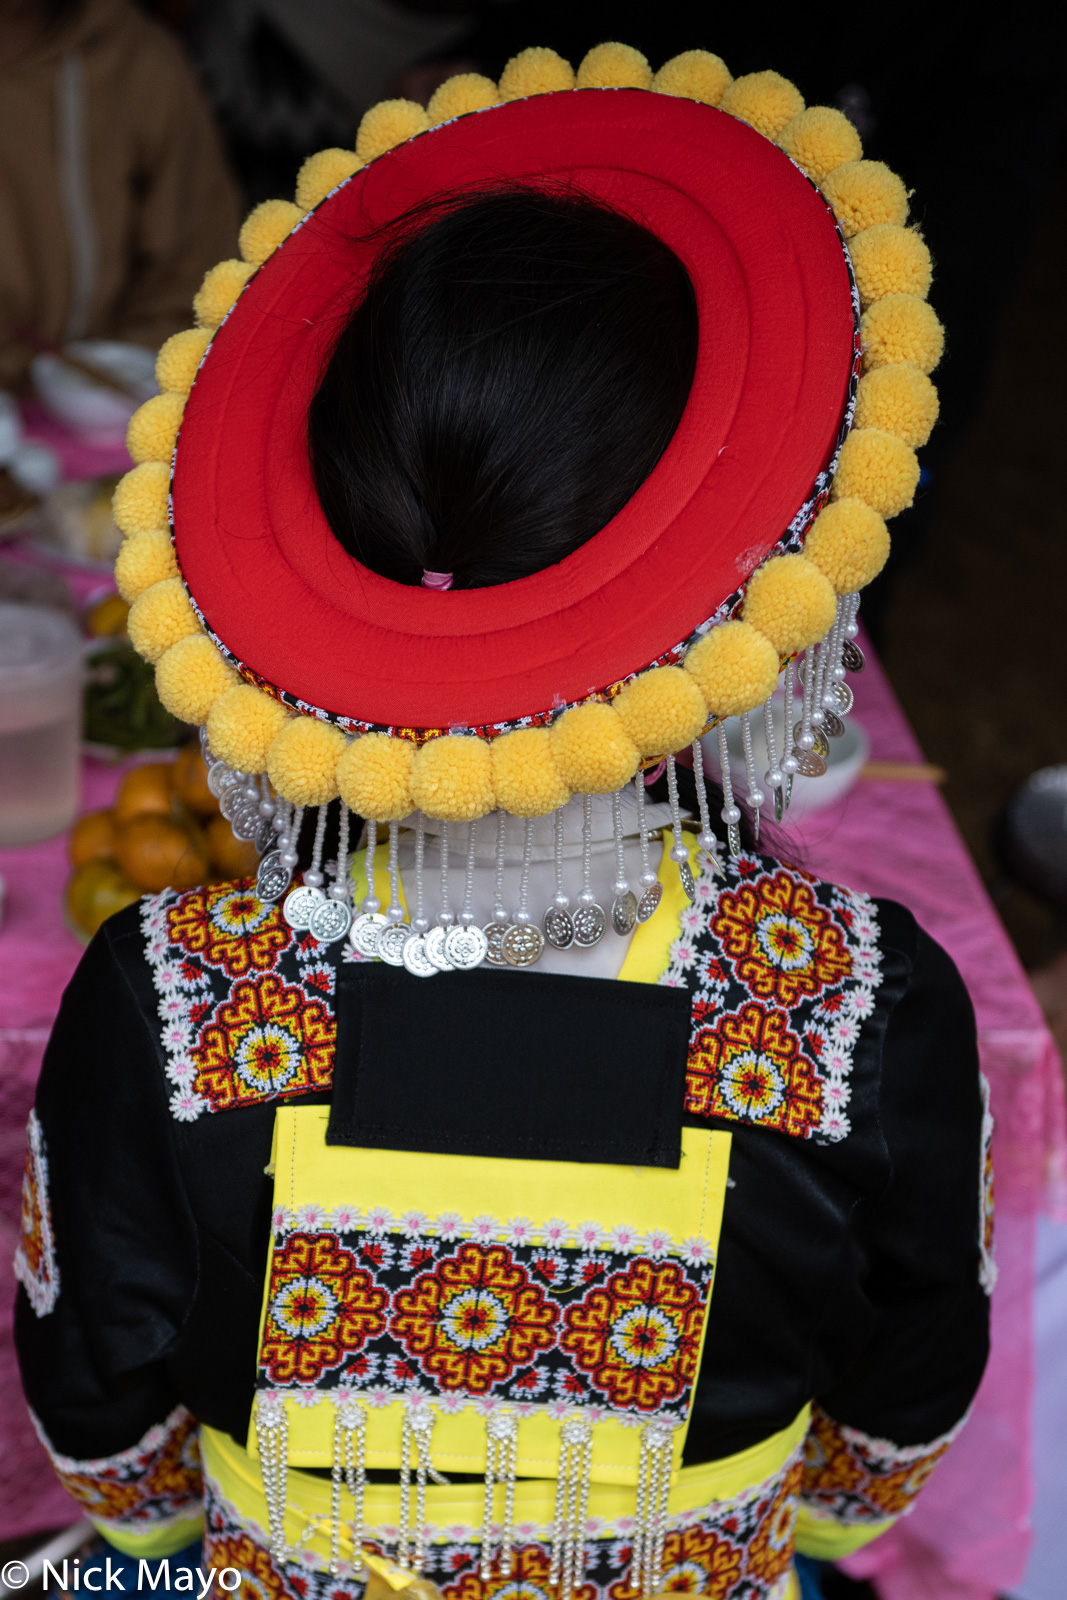 A Hmong (Miao) woman at a wedding in Phieng Ngam.